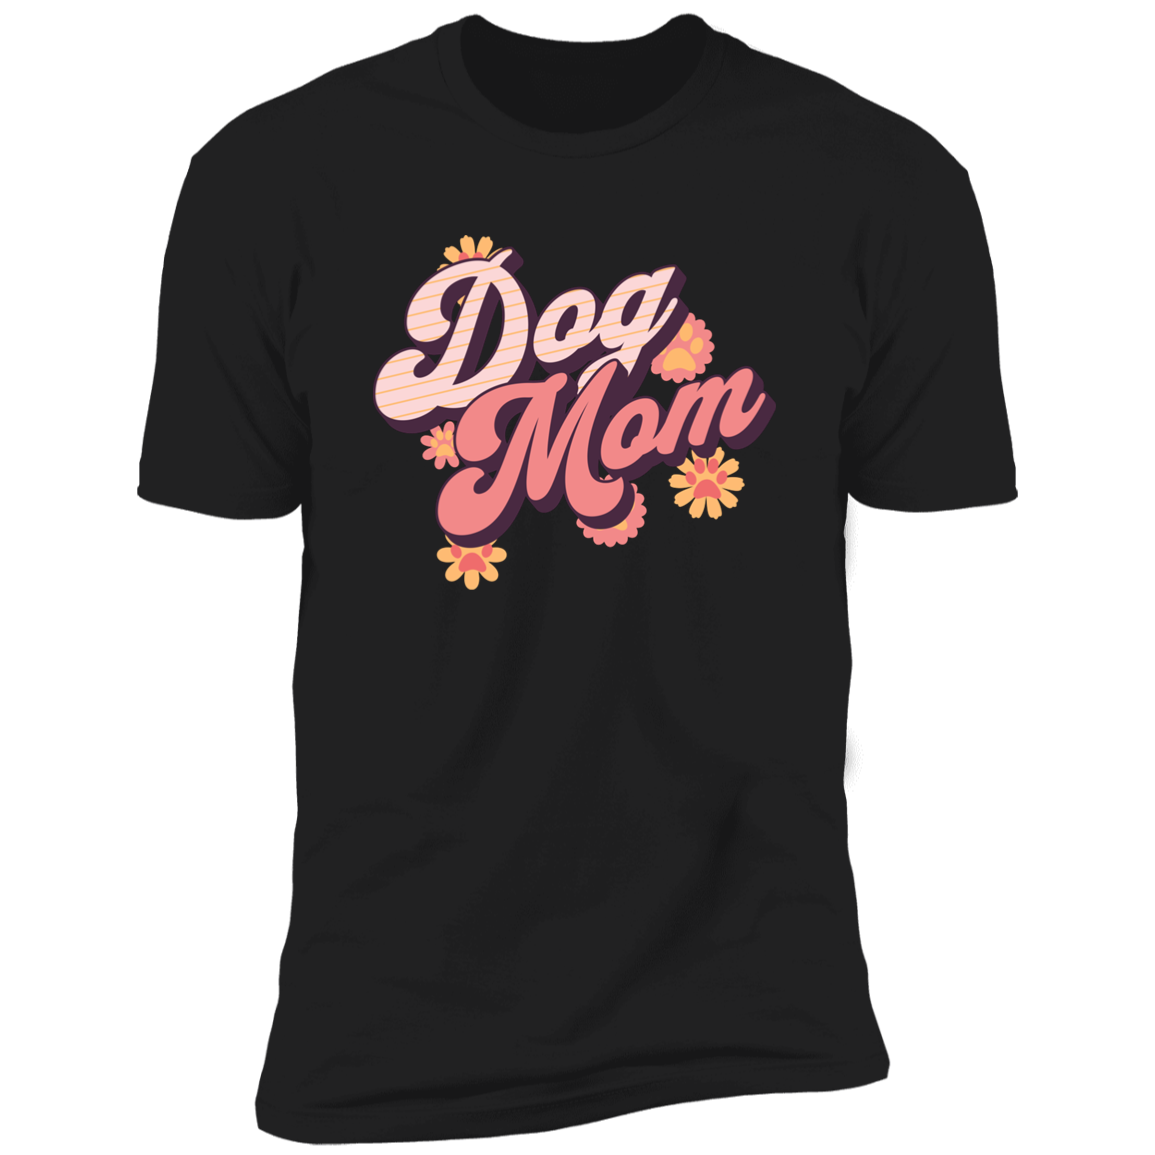 Retro Dog Mom t-shirt, Dog Mom shirt, Dog T-shirt for humans, in Black